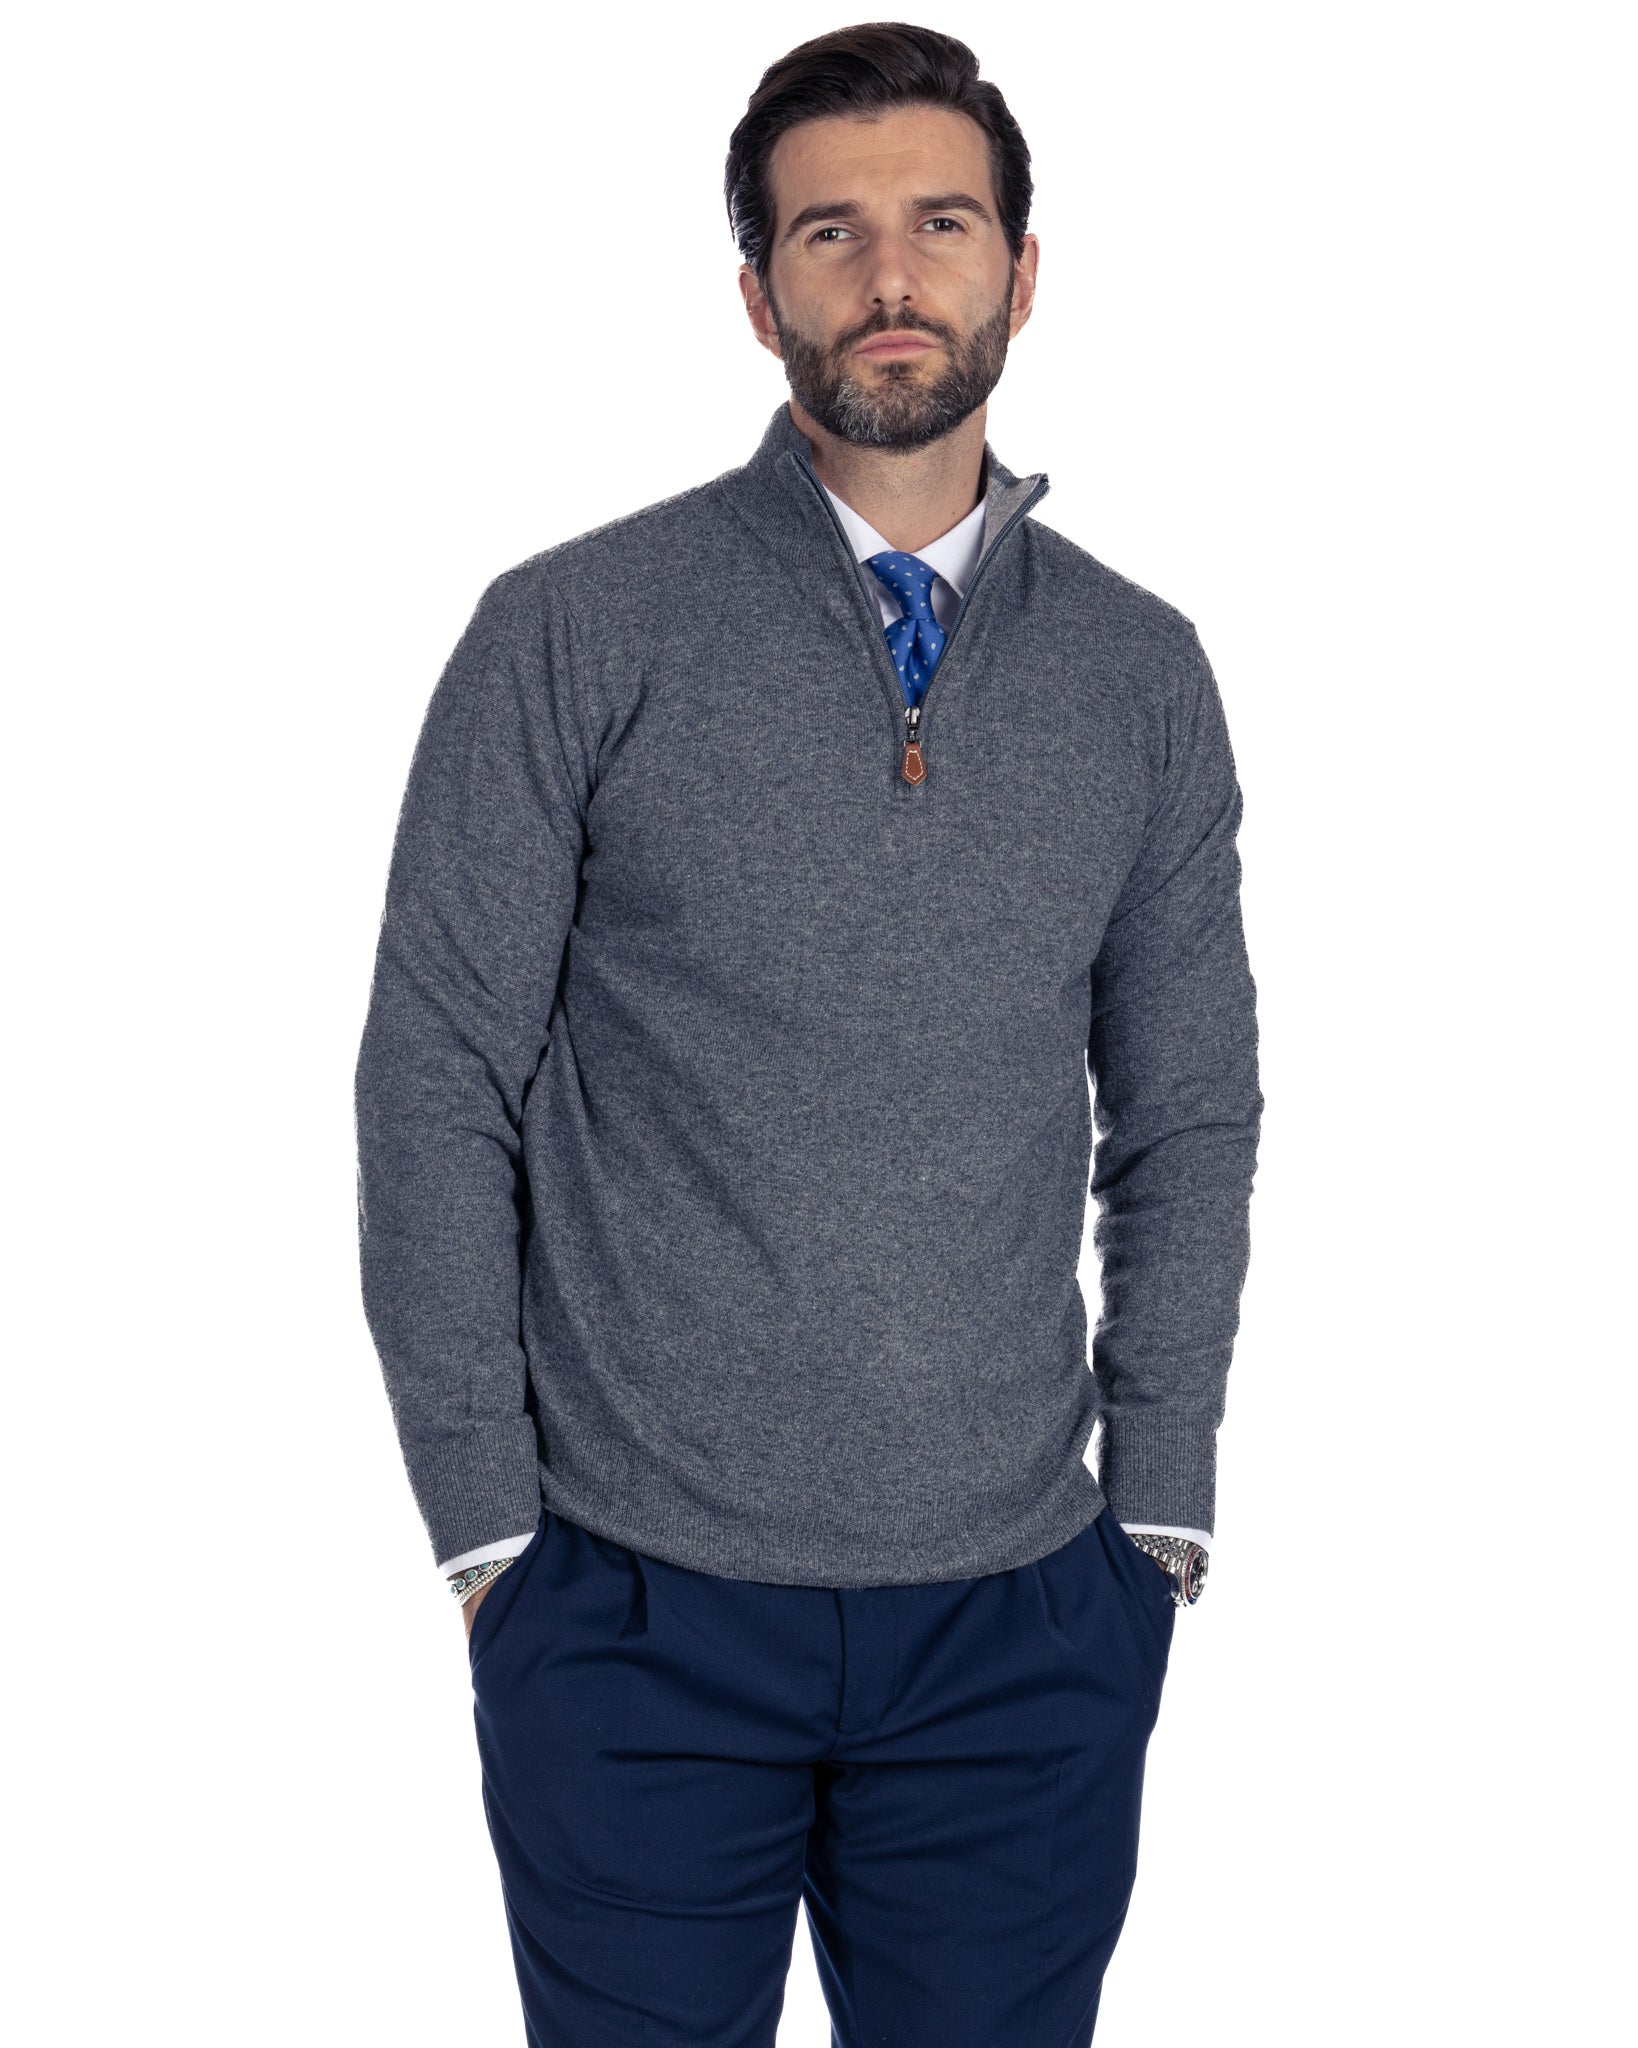 Rory - anthracite sweater with zip in cashmere blend